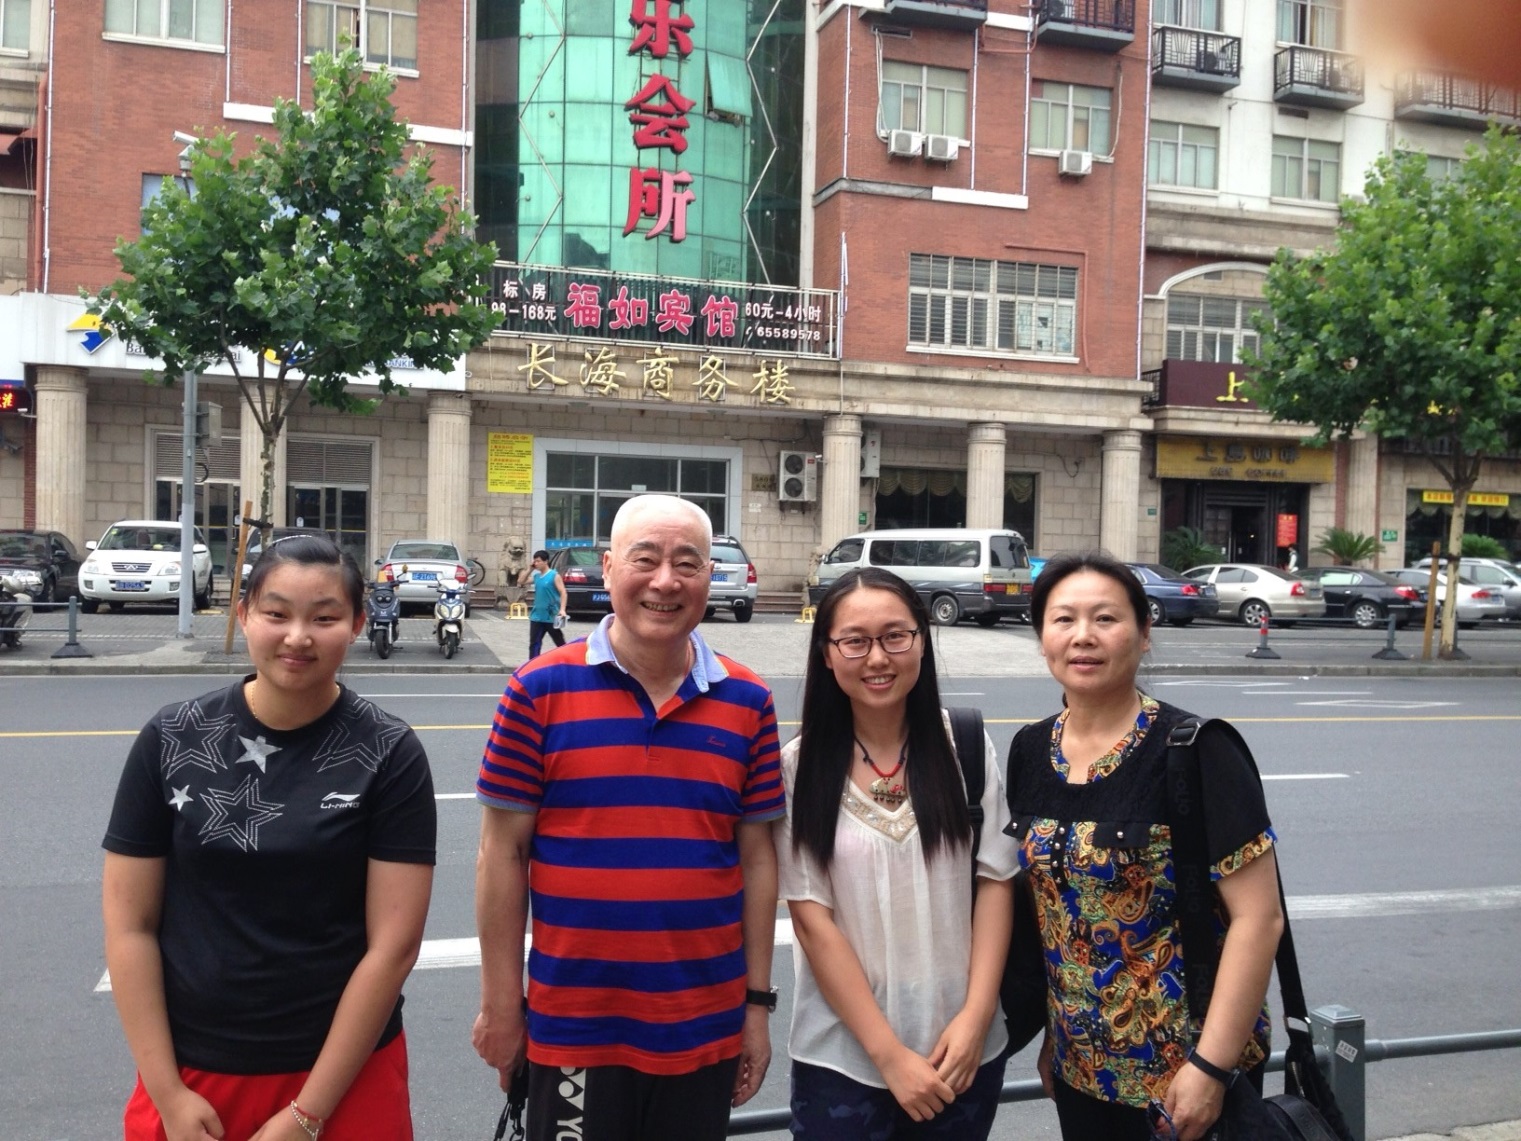 Miss Li, Professor Dai, Dingyi and Coach Ma, from left to right